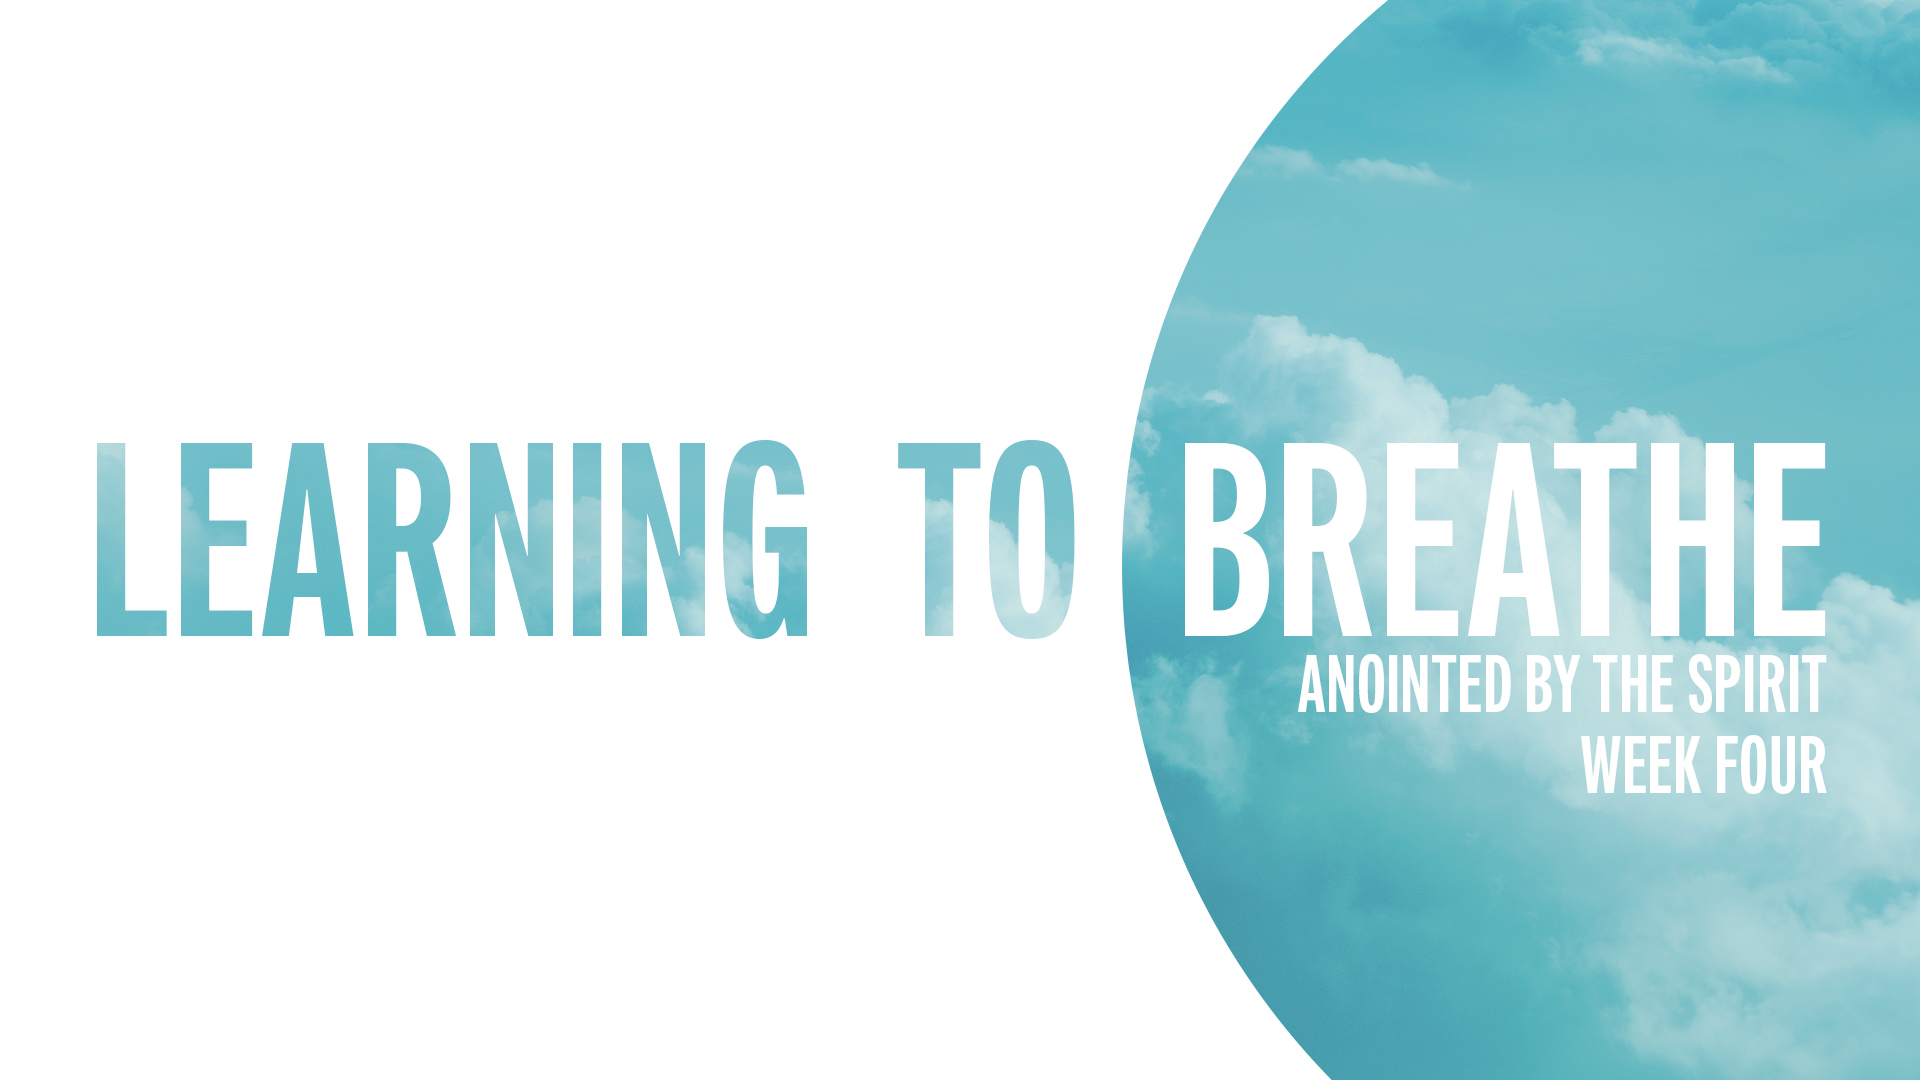 Anointed by the Spirit - Week Four